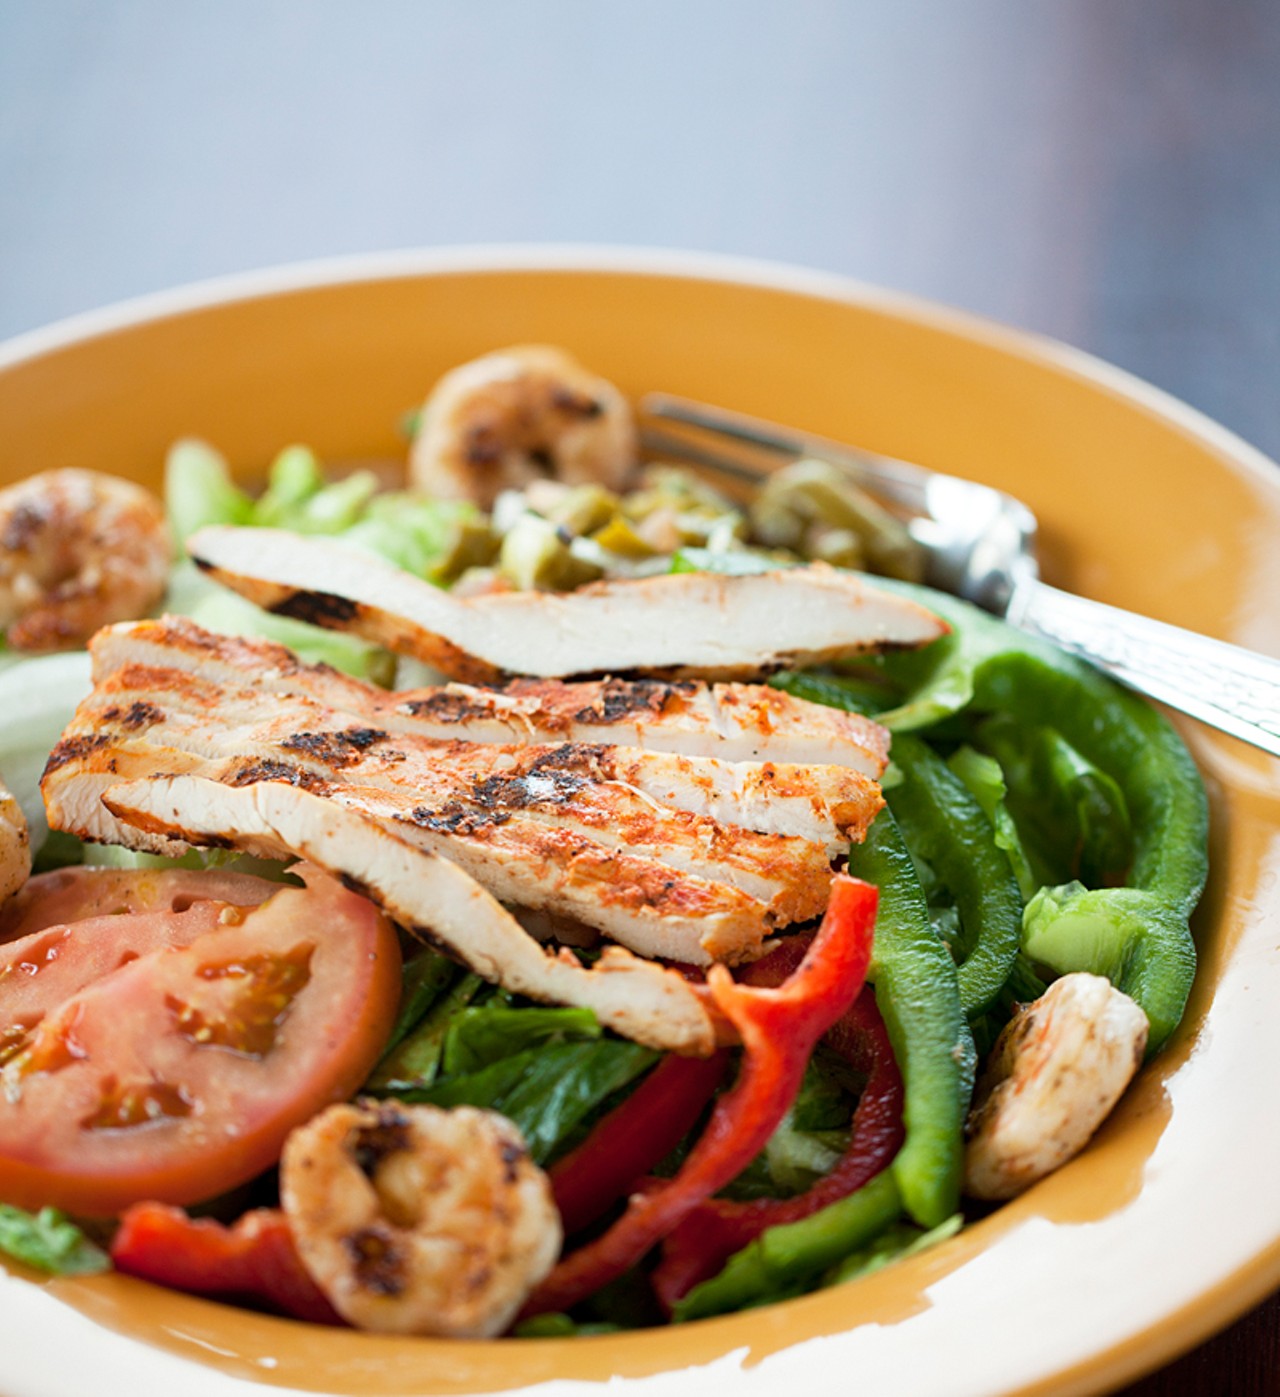 Azteca Salad" is grilled chicken and shrimp on a bed of romaine lettuce with nopales, red bell pepper, green bell pepper and onions, and it's served with the house chipotle-ranch dressing.